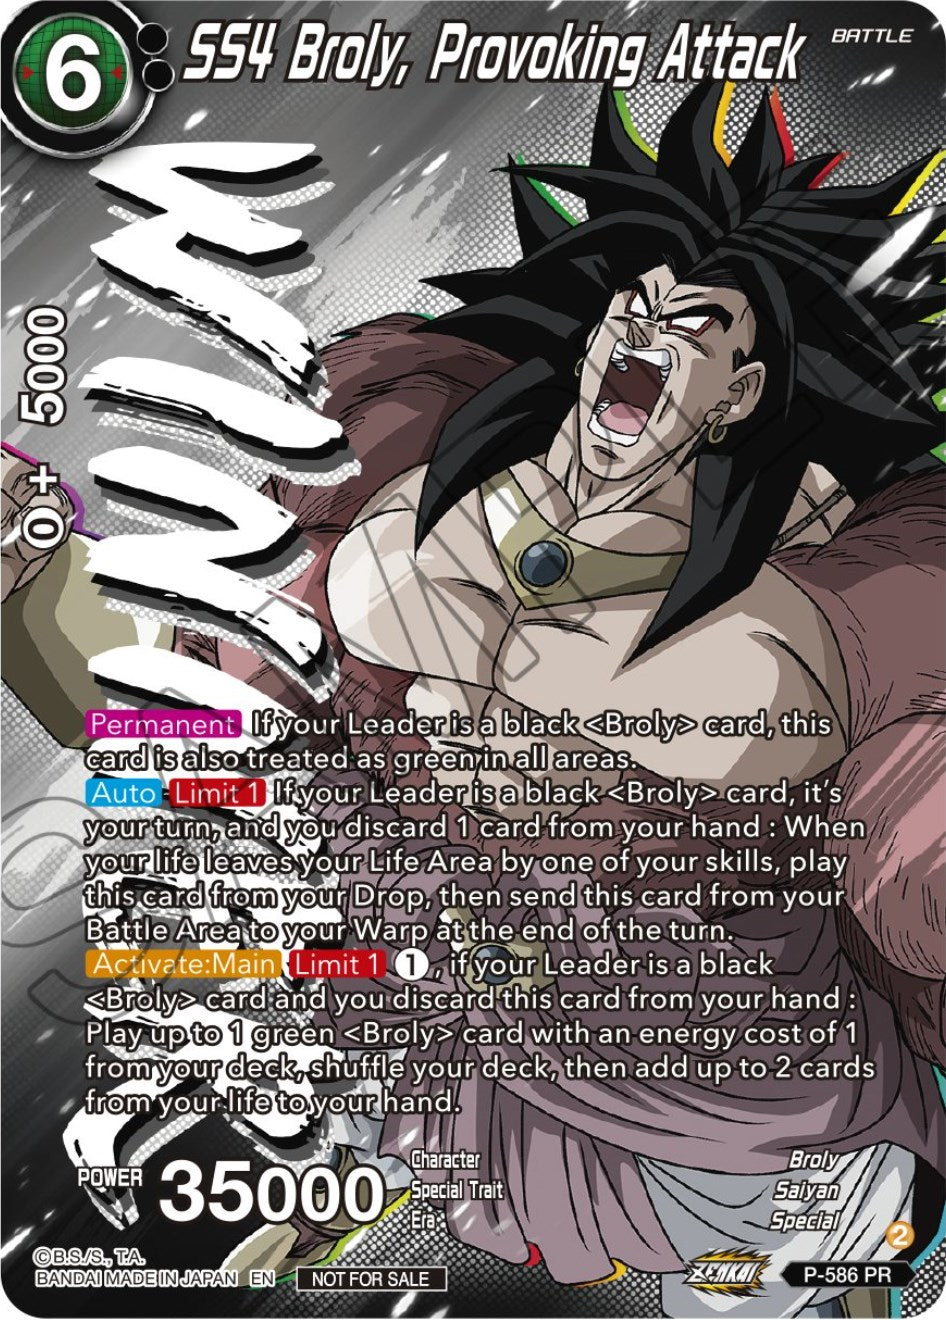 SS4 Broly, Provoking Attack (Zenkai Series Tournament Pack Vol.7) (Winner) (P-586) [Tournament Promotion Cards] | Sanctuary Gaming